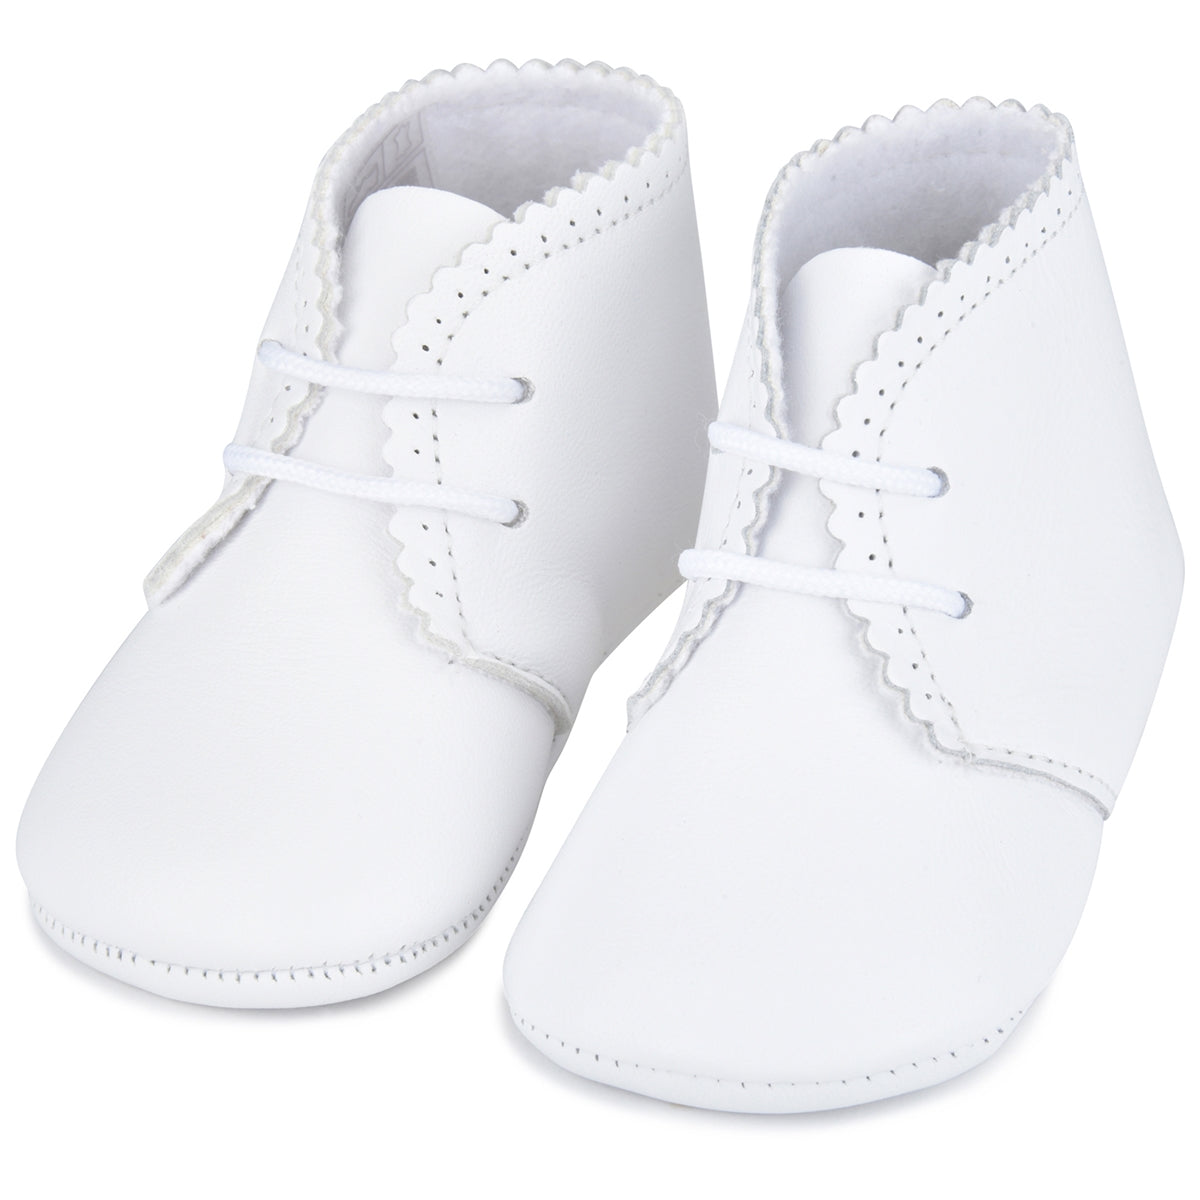 Personalized NameDate Lace-Ups - a classic baby shoe gift - Babyshoe.com